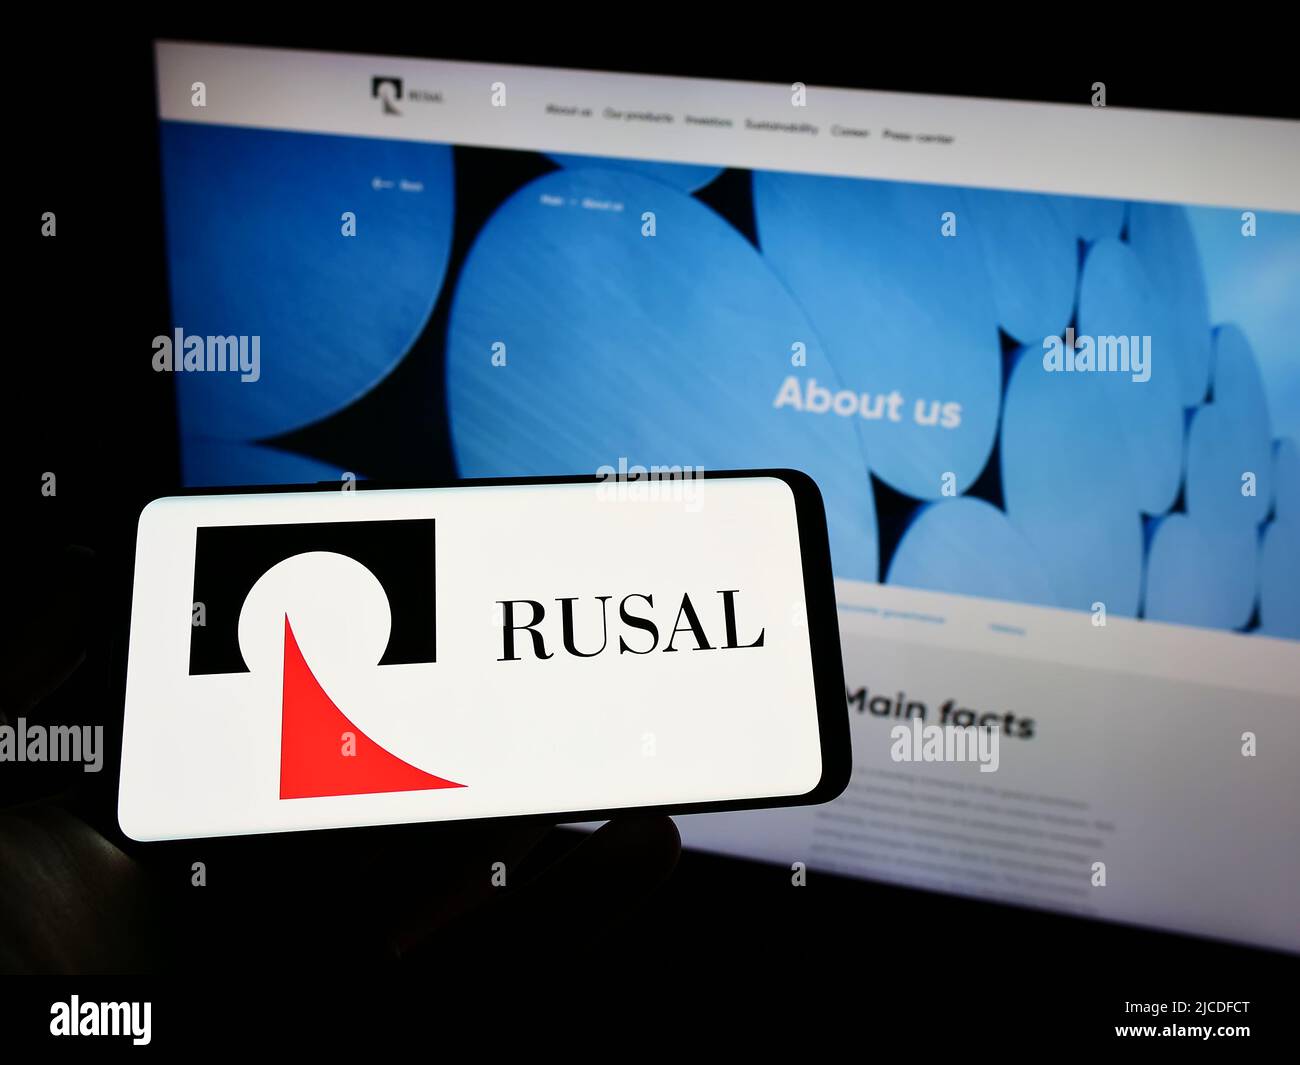 Person holding mobile phone with logo of Russian company United Company RUSAL IPJSC on screen in front of web page. Focus on phone display. Stock Photo